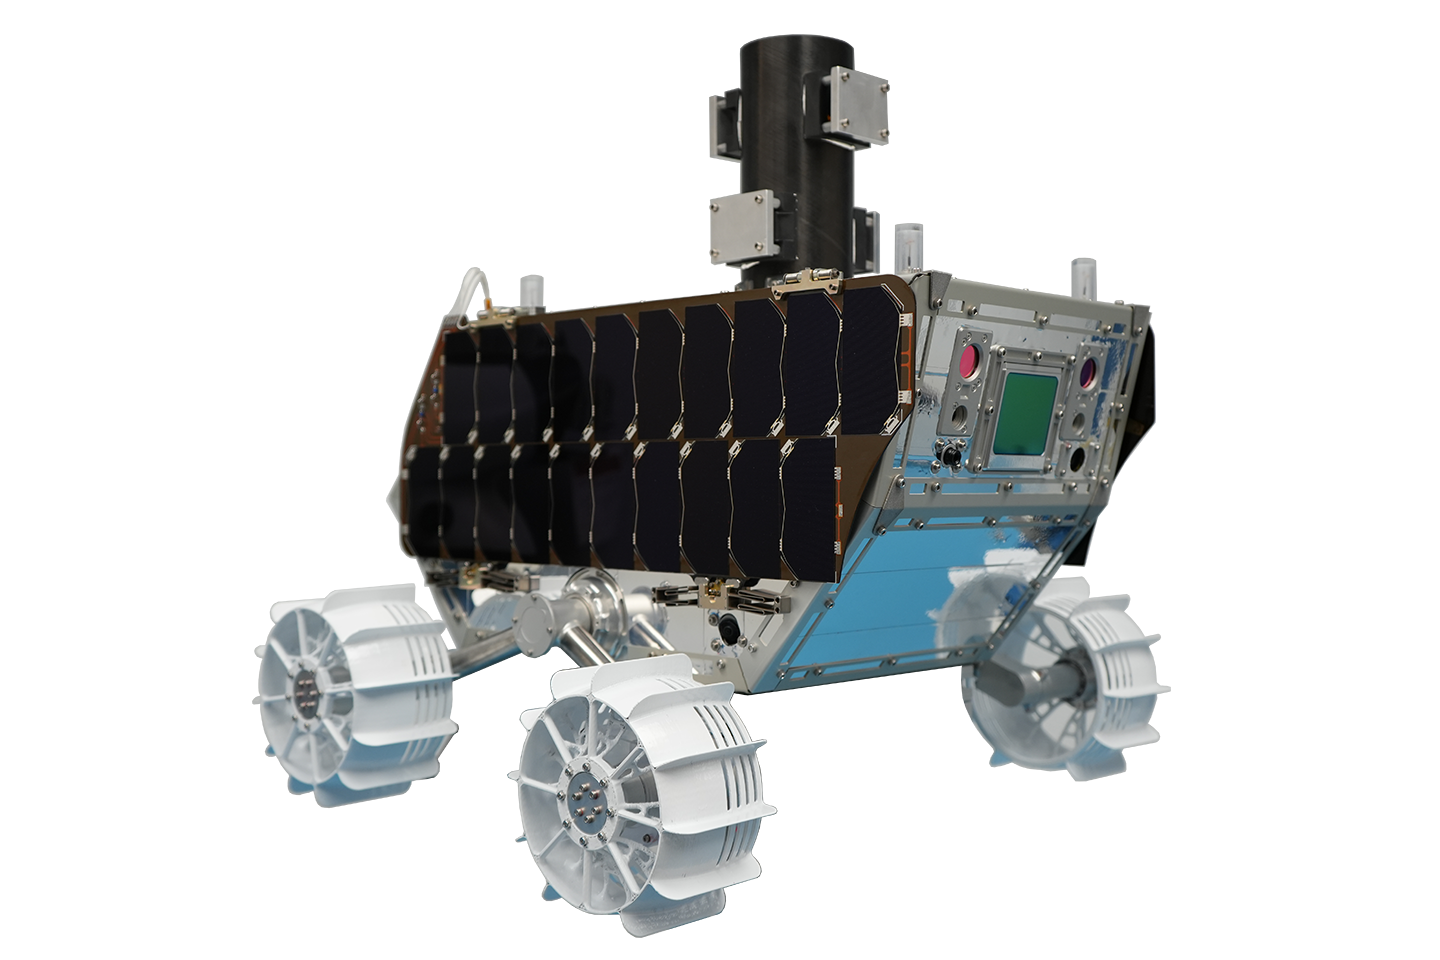 A 3D-generated illustration of the Lunar Vertex rover